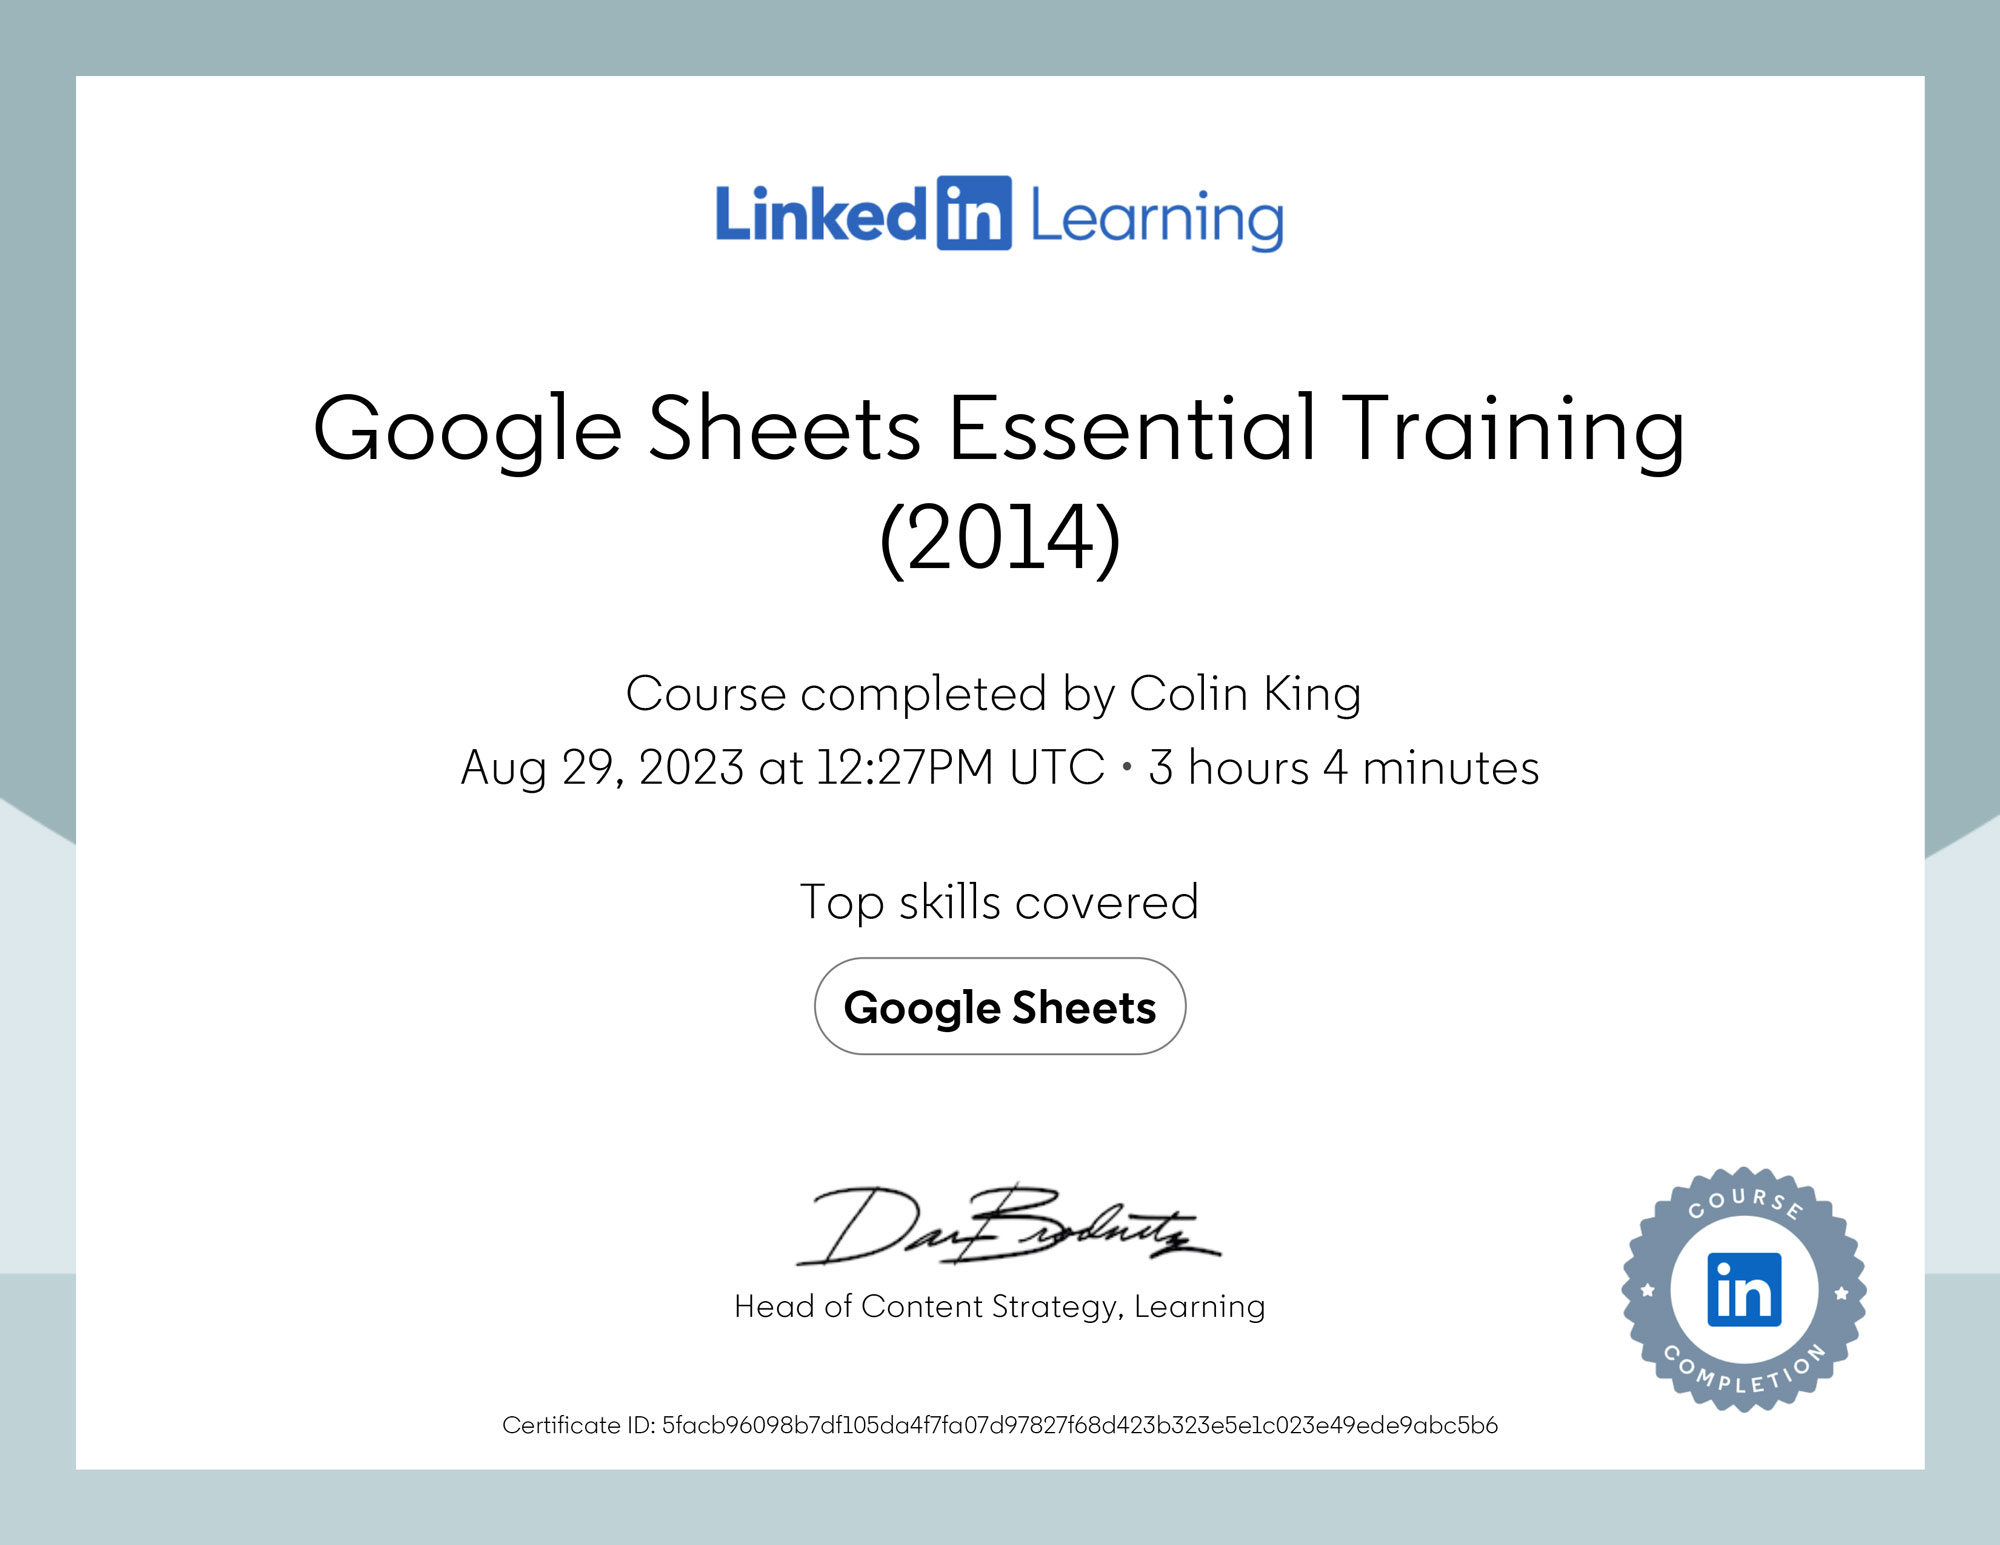 Google sheets essential training Certificate Of Completion